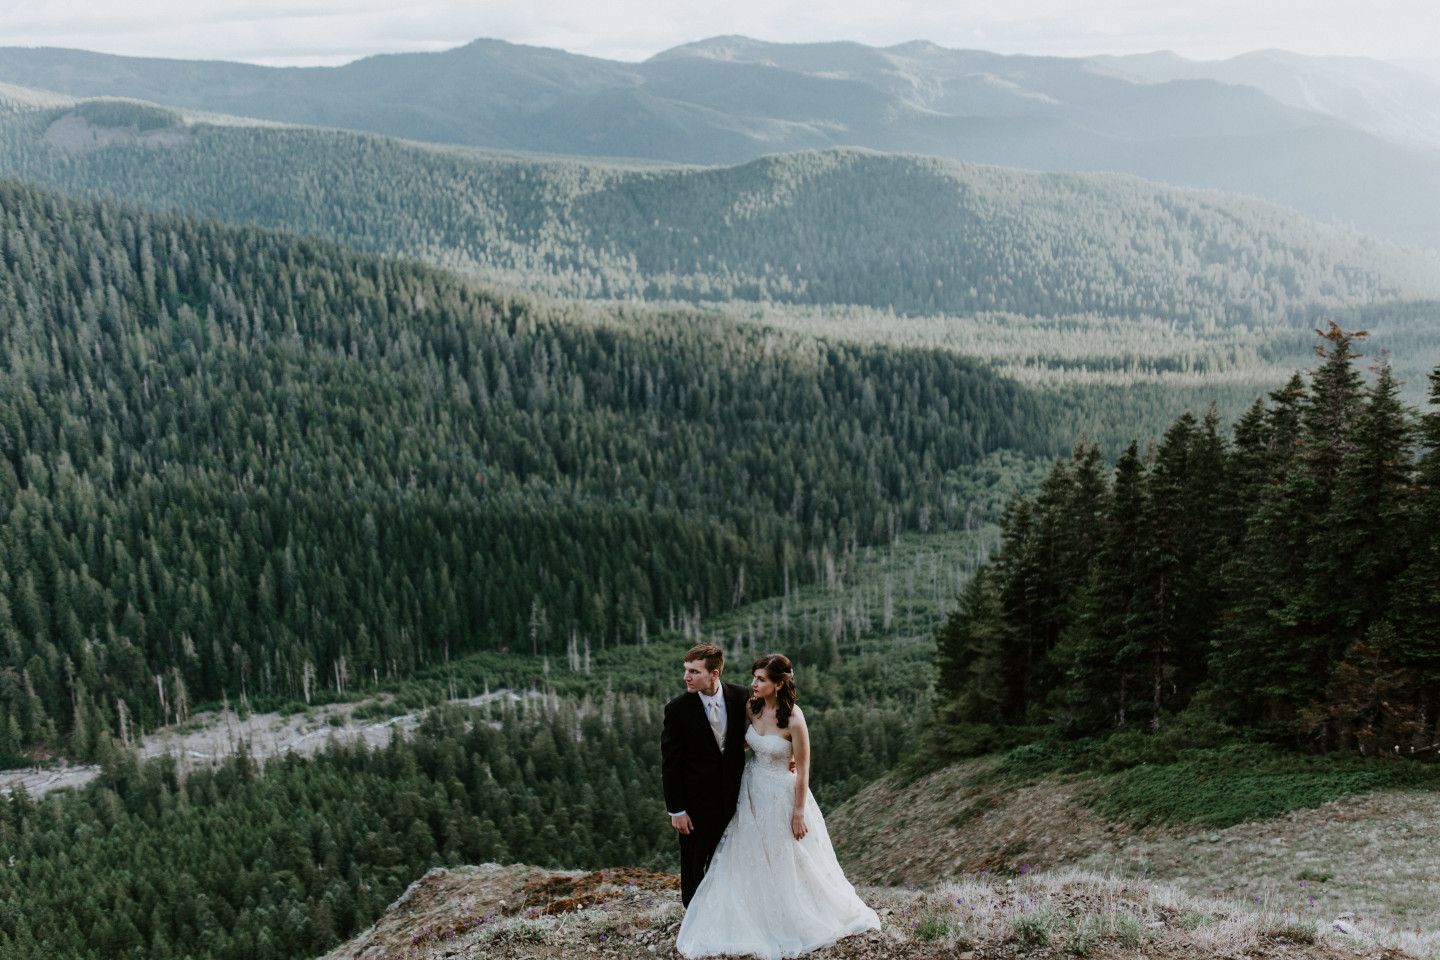 Moira and Ryan stand along the trail to Mount Hood. Adventure elopement wedding shoot by Sienna Plus Josh.